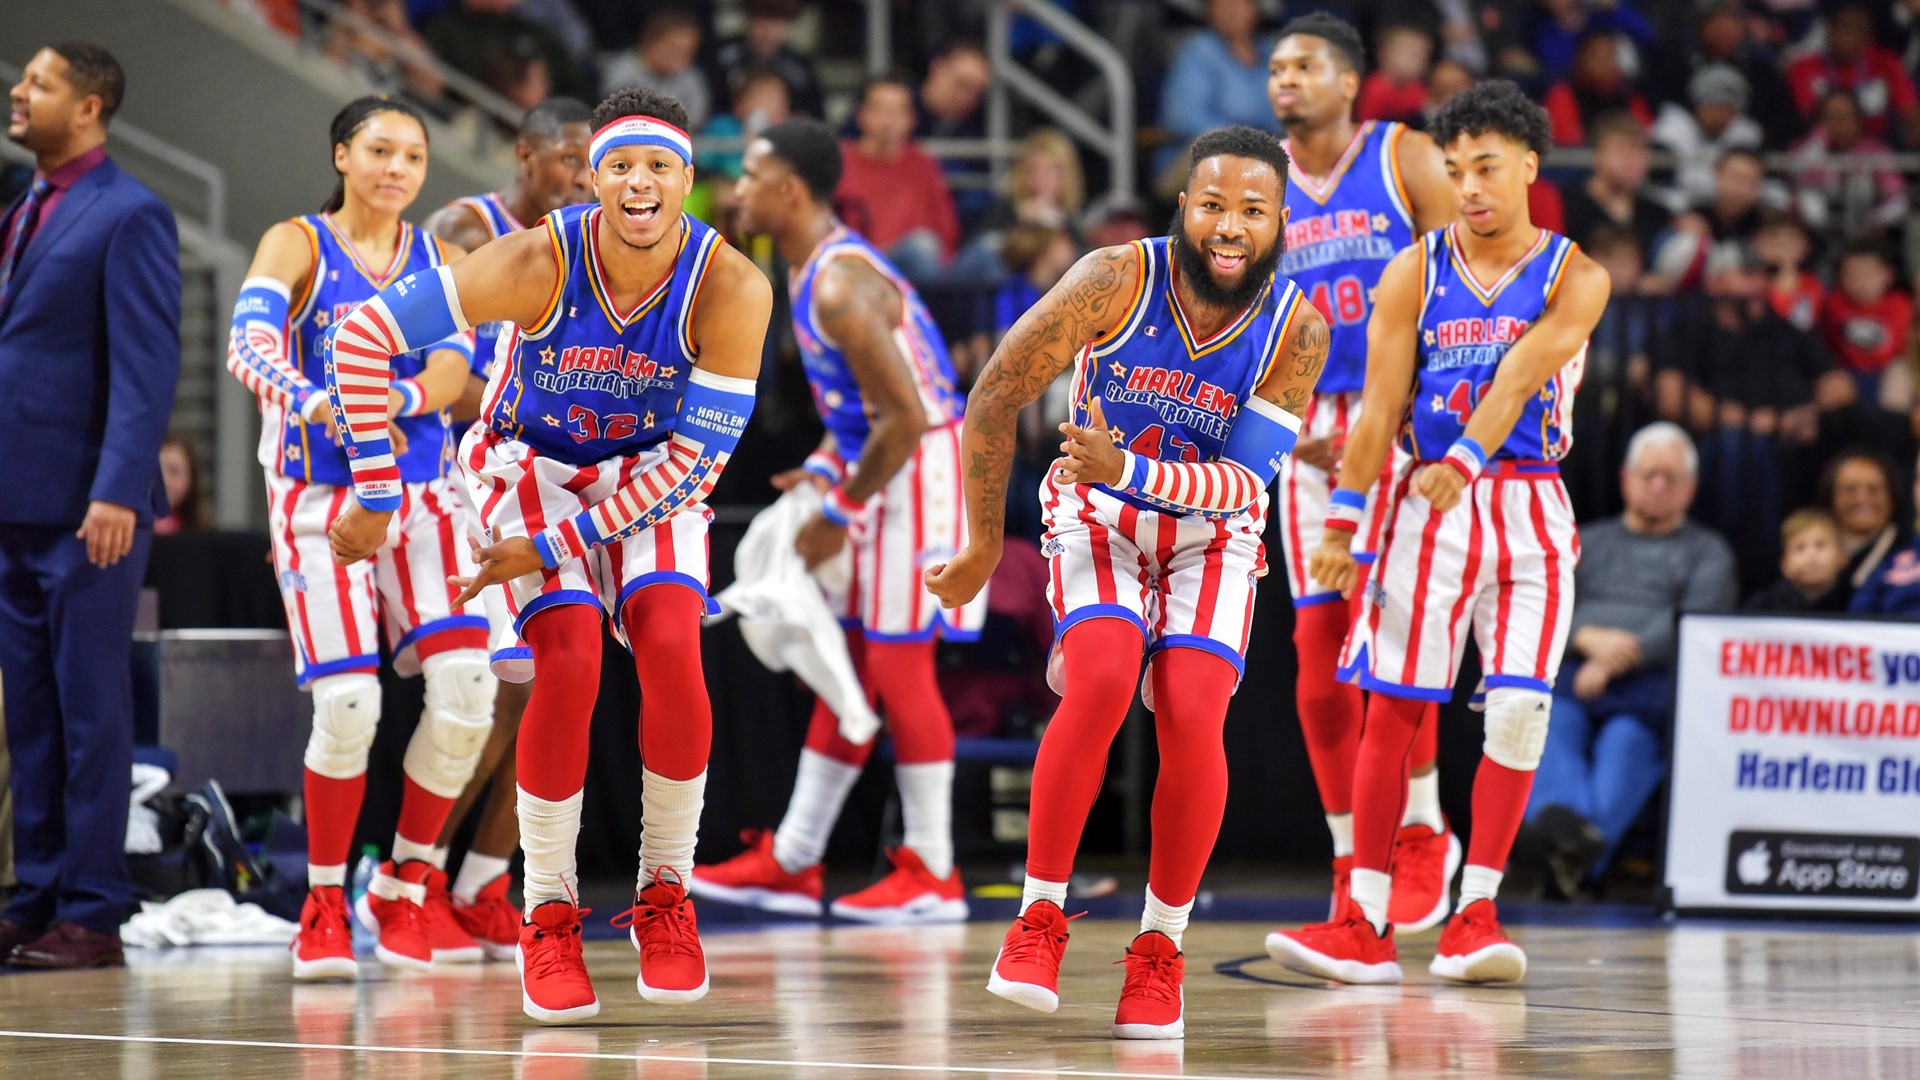 Harlem Globetrotters 2023 World Tour coming to Seattle, Everett